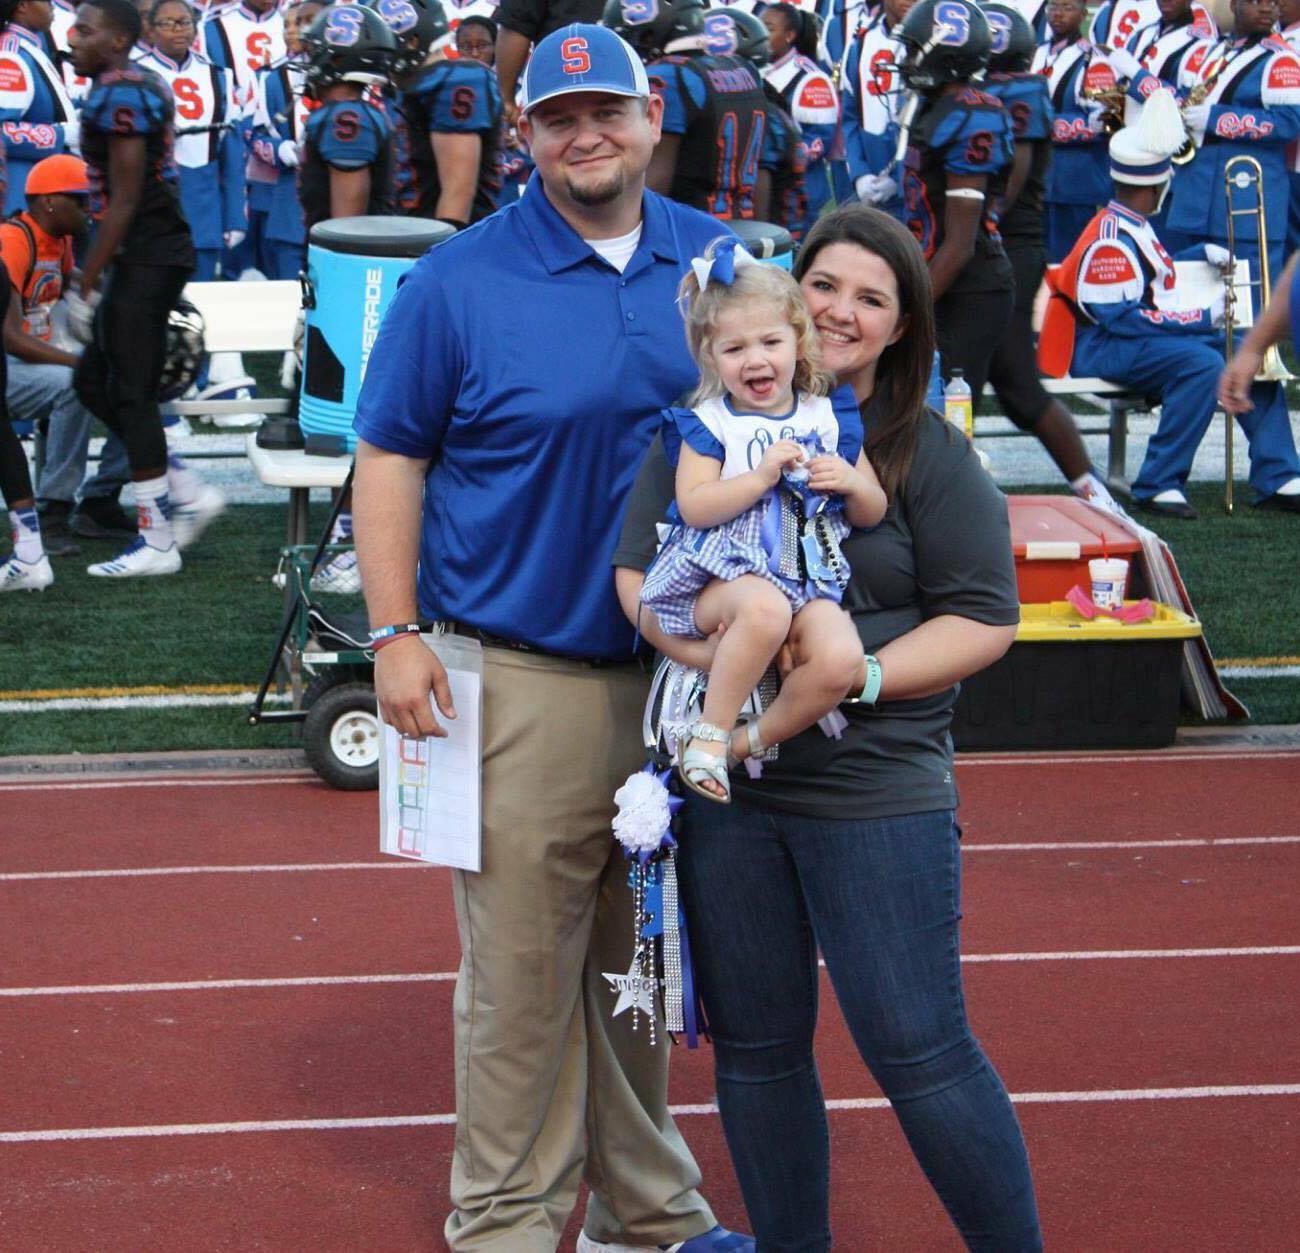 PHOTO: Ollie Malone, 2, poses in an undated photograph with her parents, Micah and Cody Malone, at Southwood High School's football game in Shreveport, La.